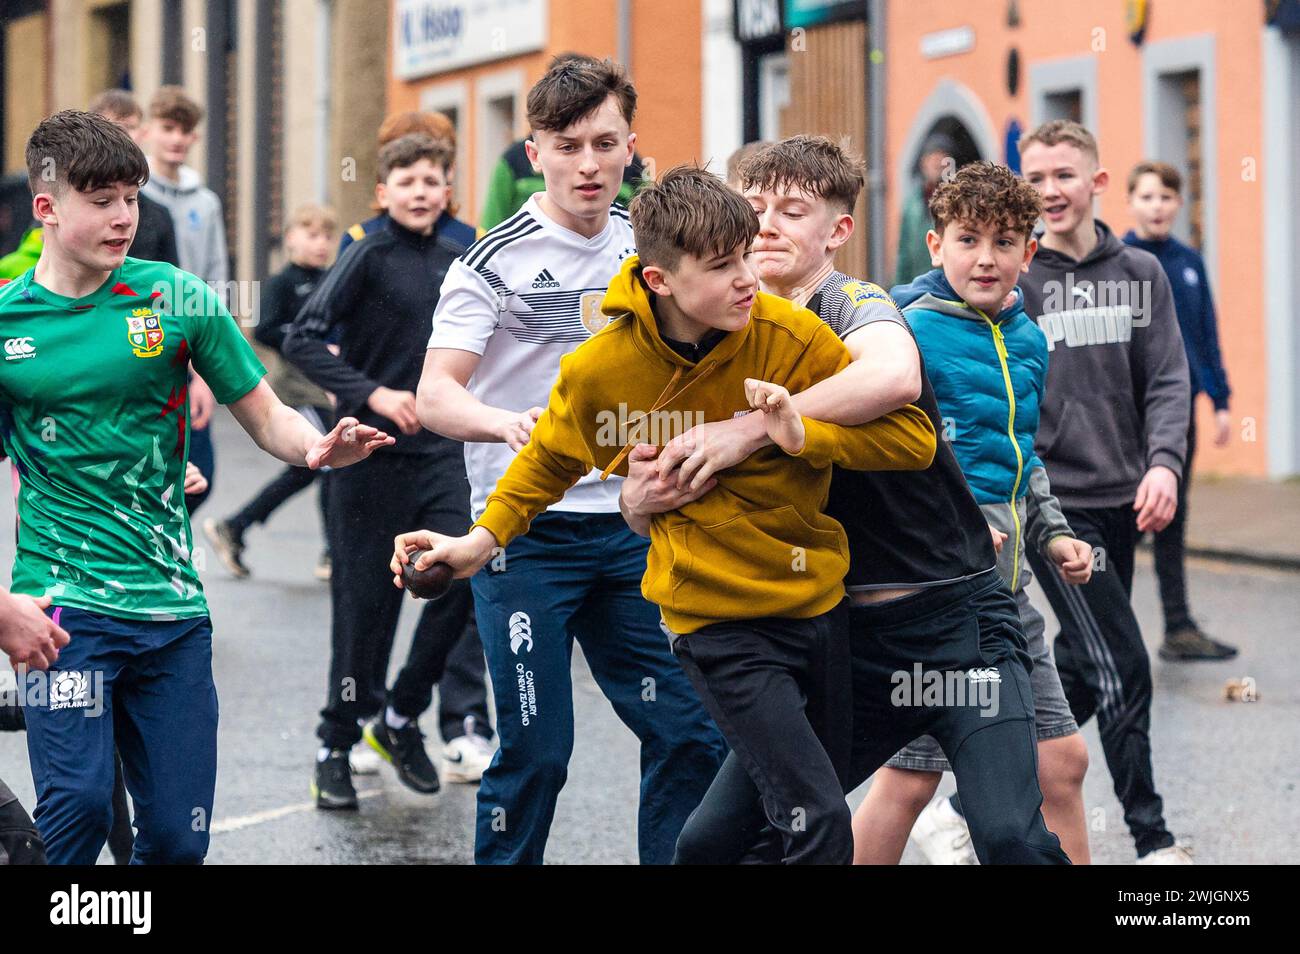 Youths take part in the annual 'Hand ba' is played in Scottish borders town Jedburgh. Traditionally the first ever game was played with an Englishman’s head,  the ribbons on the ball symbolise his hair. The teams (Uppies and Doonies) are chosen by where they live – Uppies are those born to the South and Doonies to the North of the Market Cross.  Credit: Euan Cherry Stock Photo